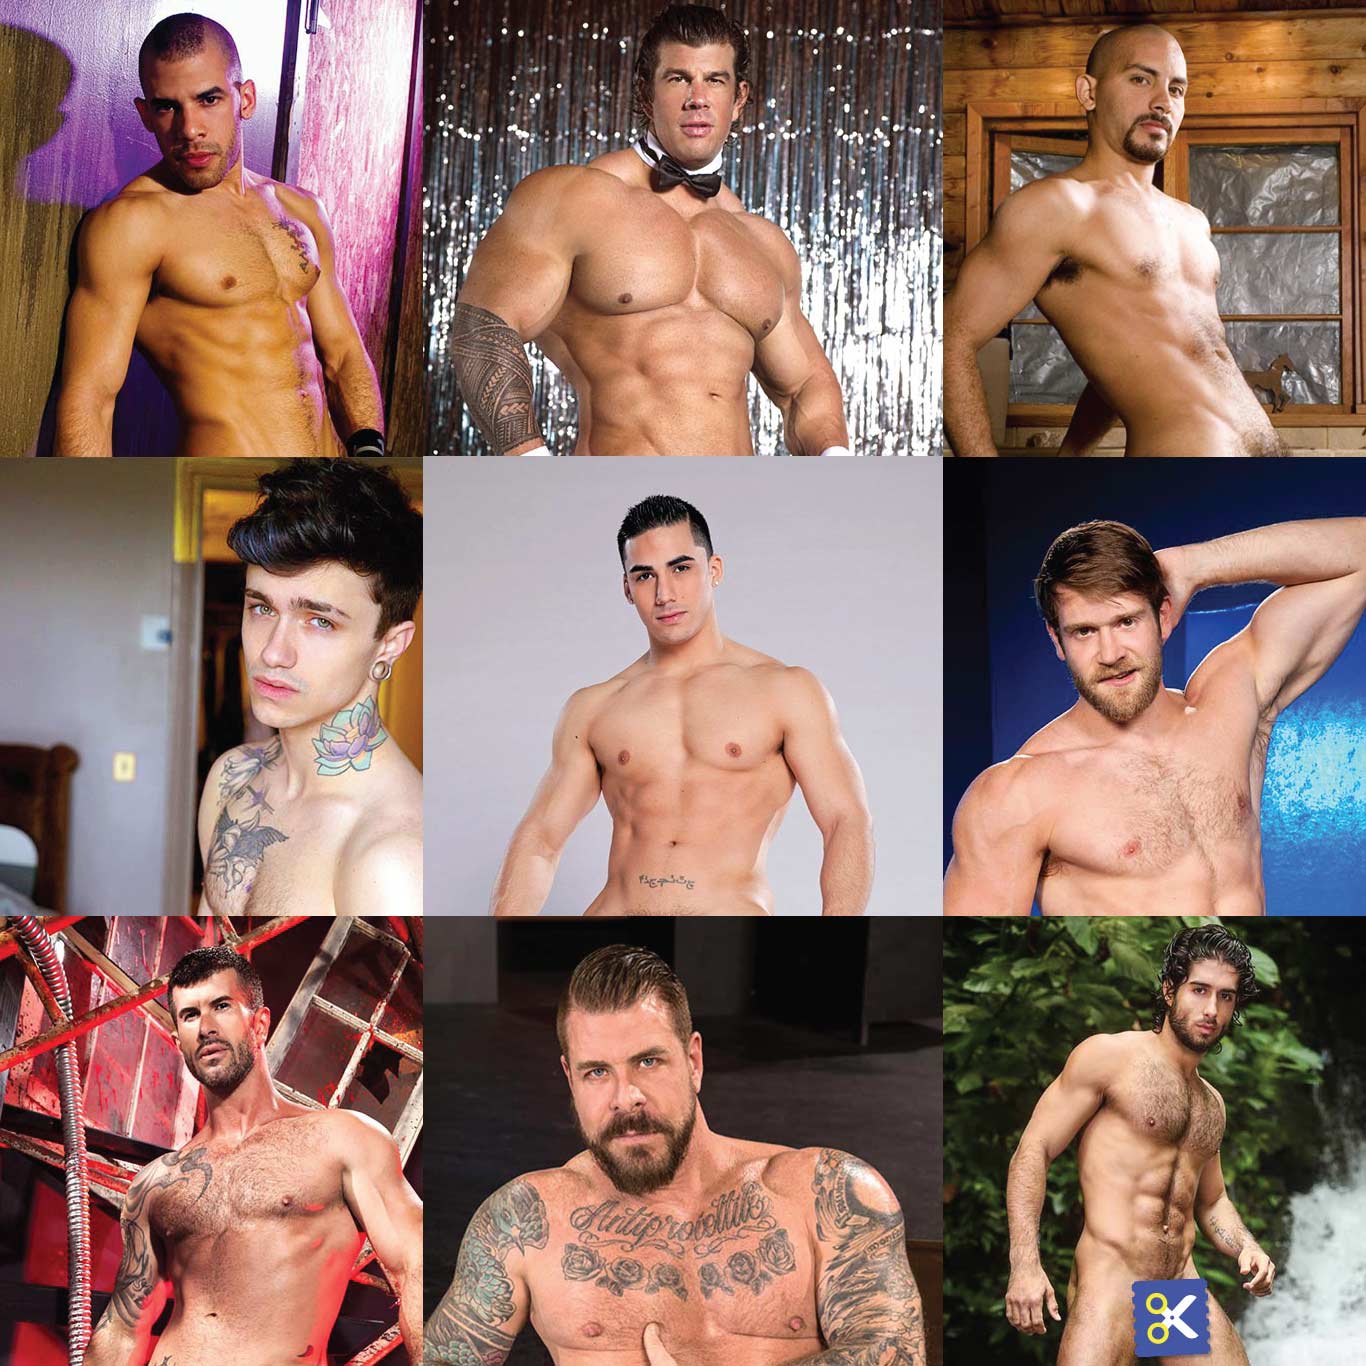 complete list of gay porn stars